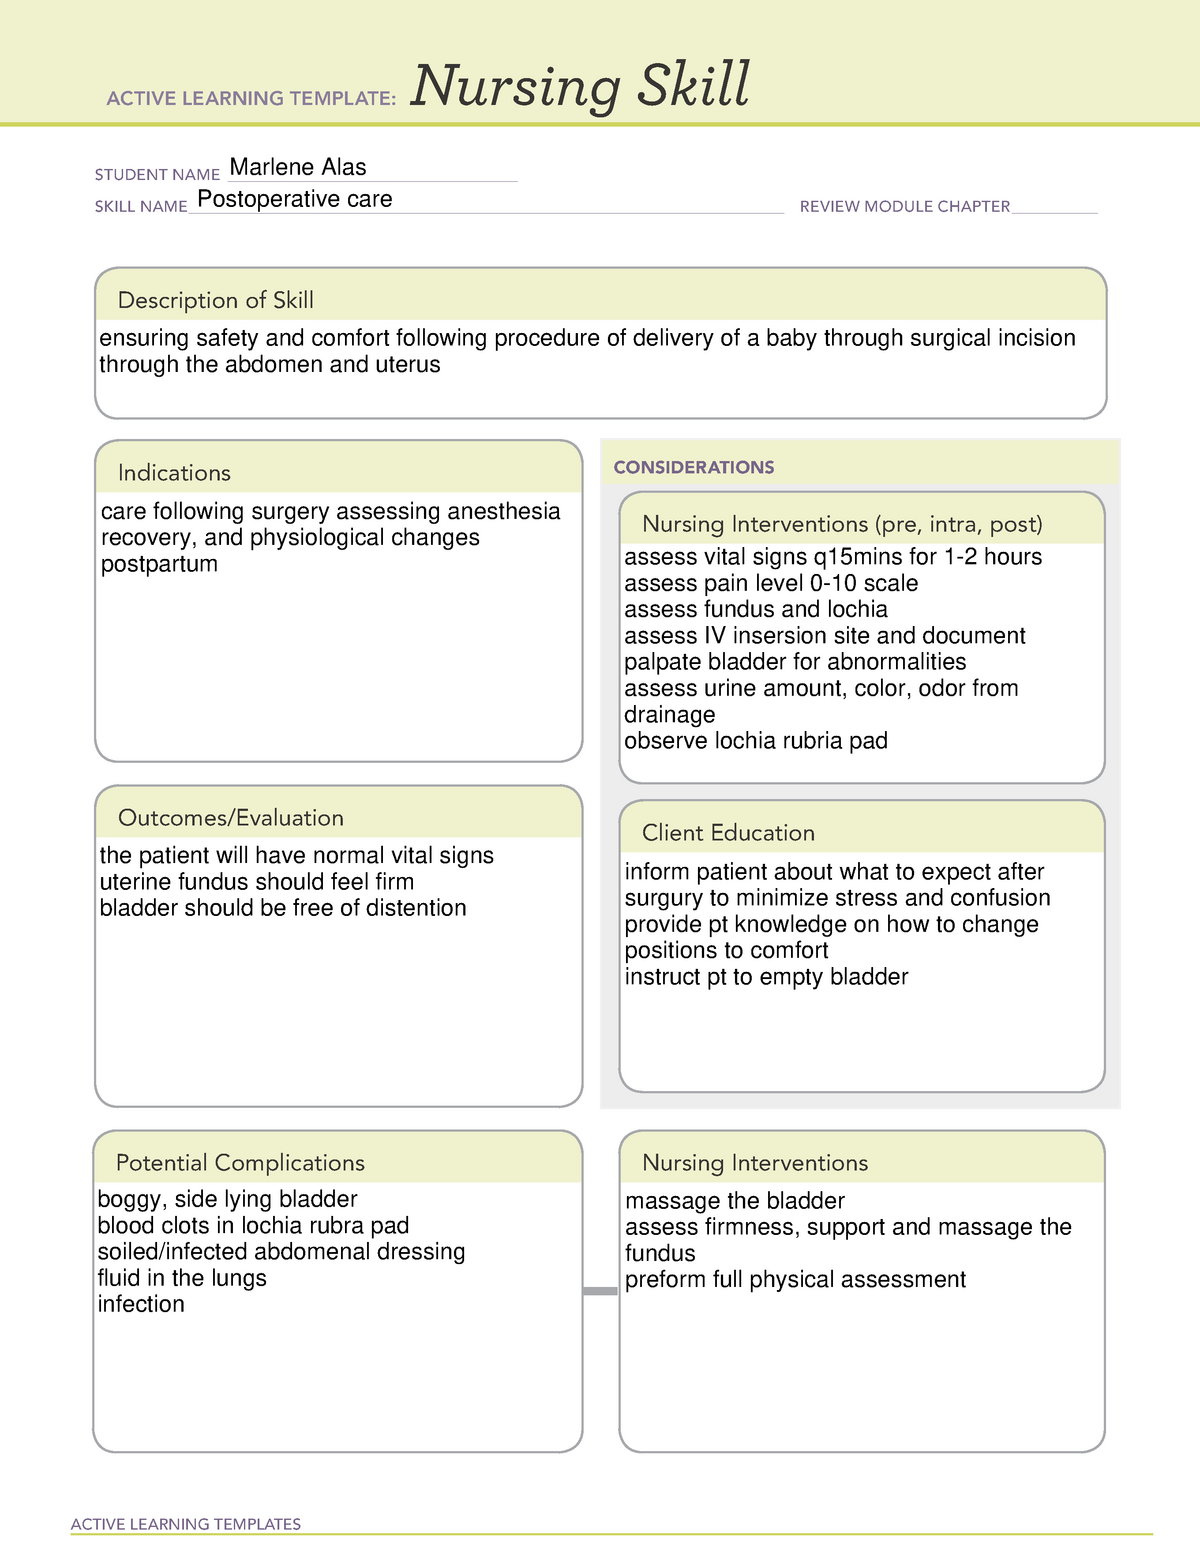 postop-maternity-active-learning-templates-nursing-skill-student-name